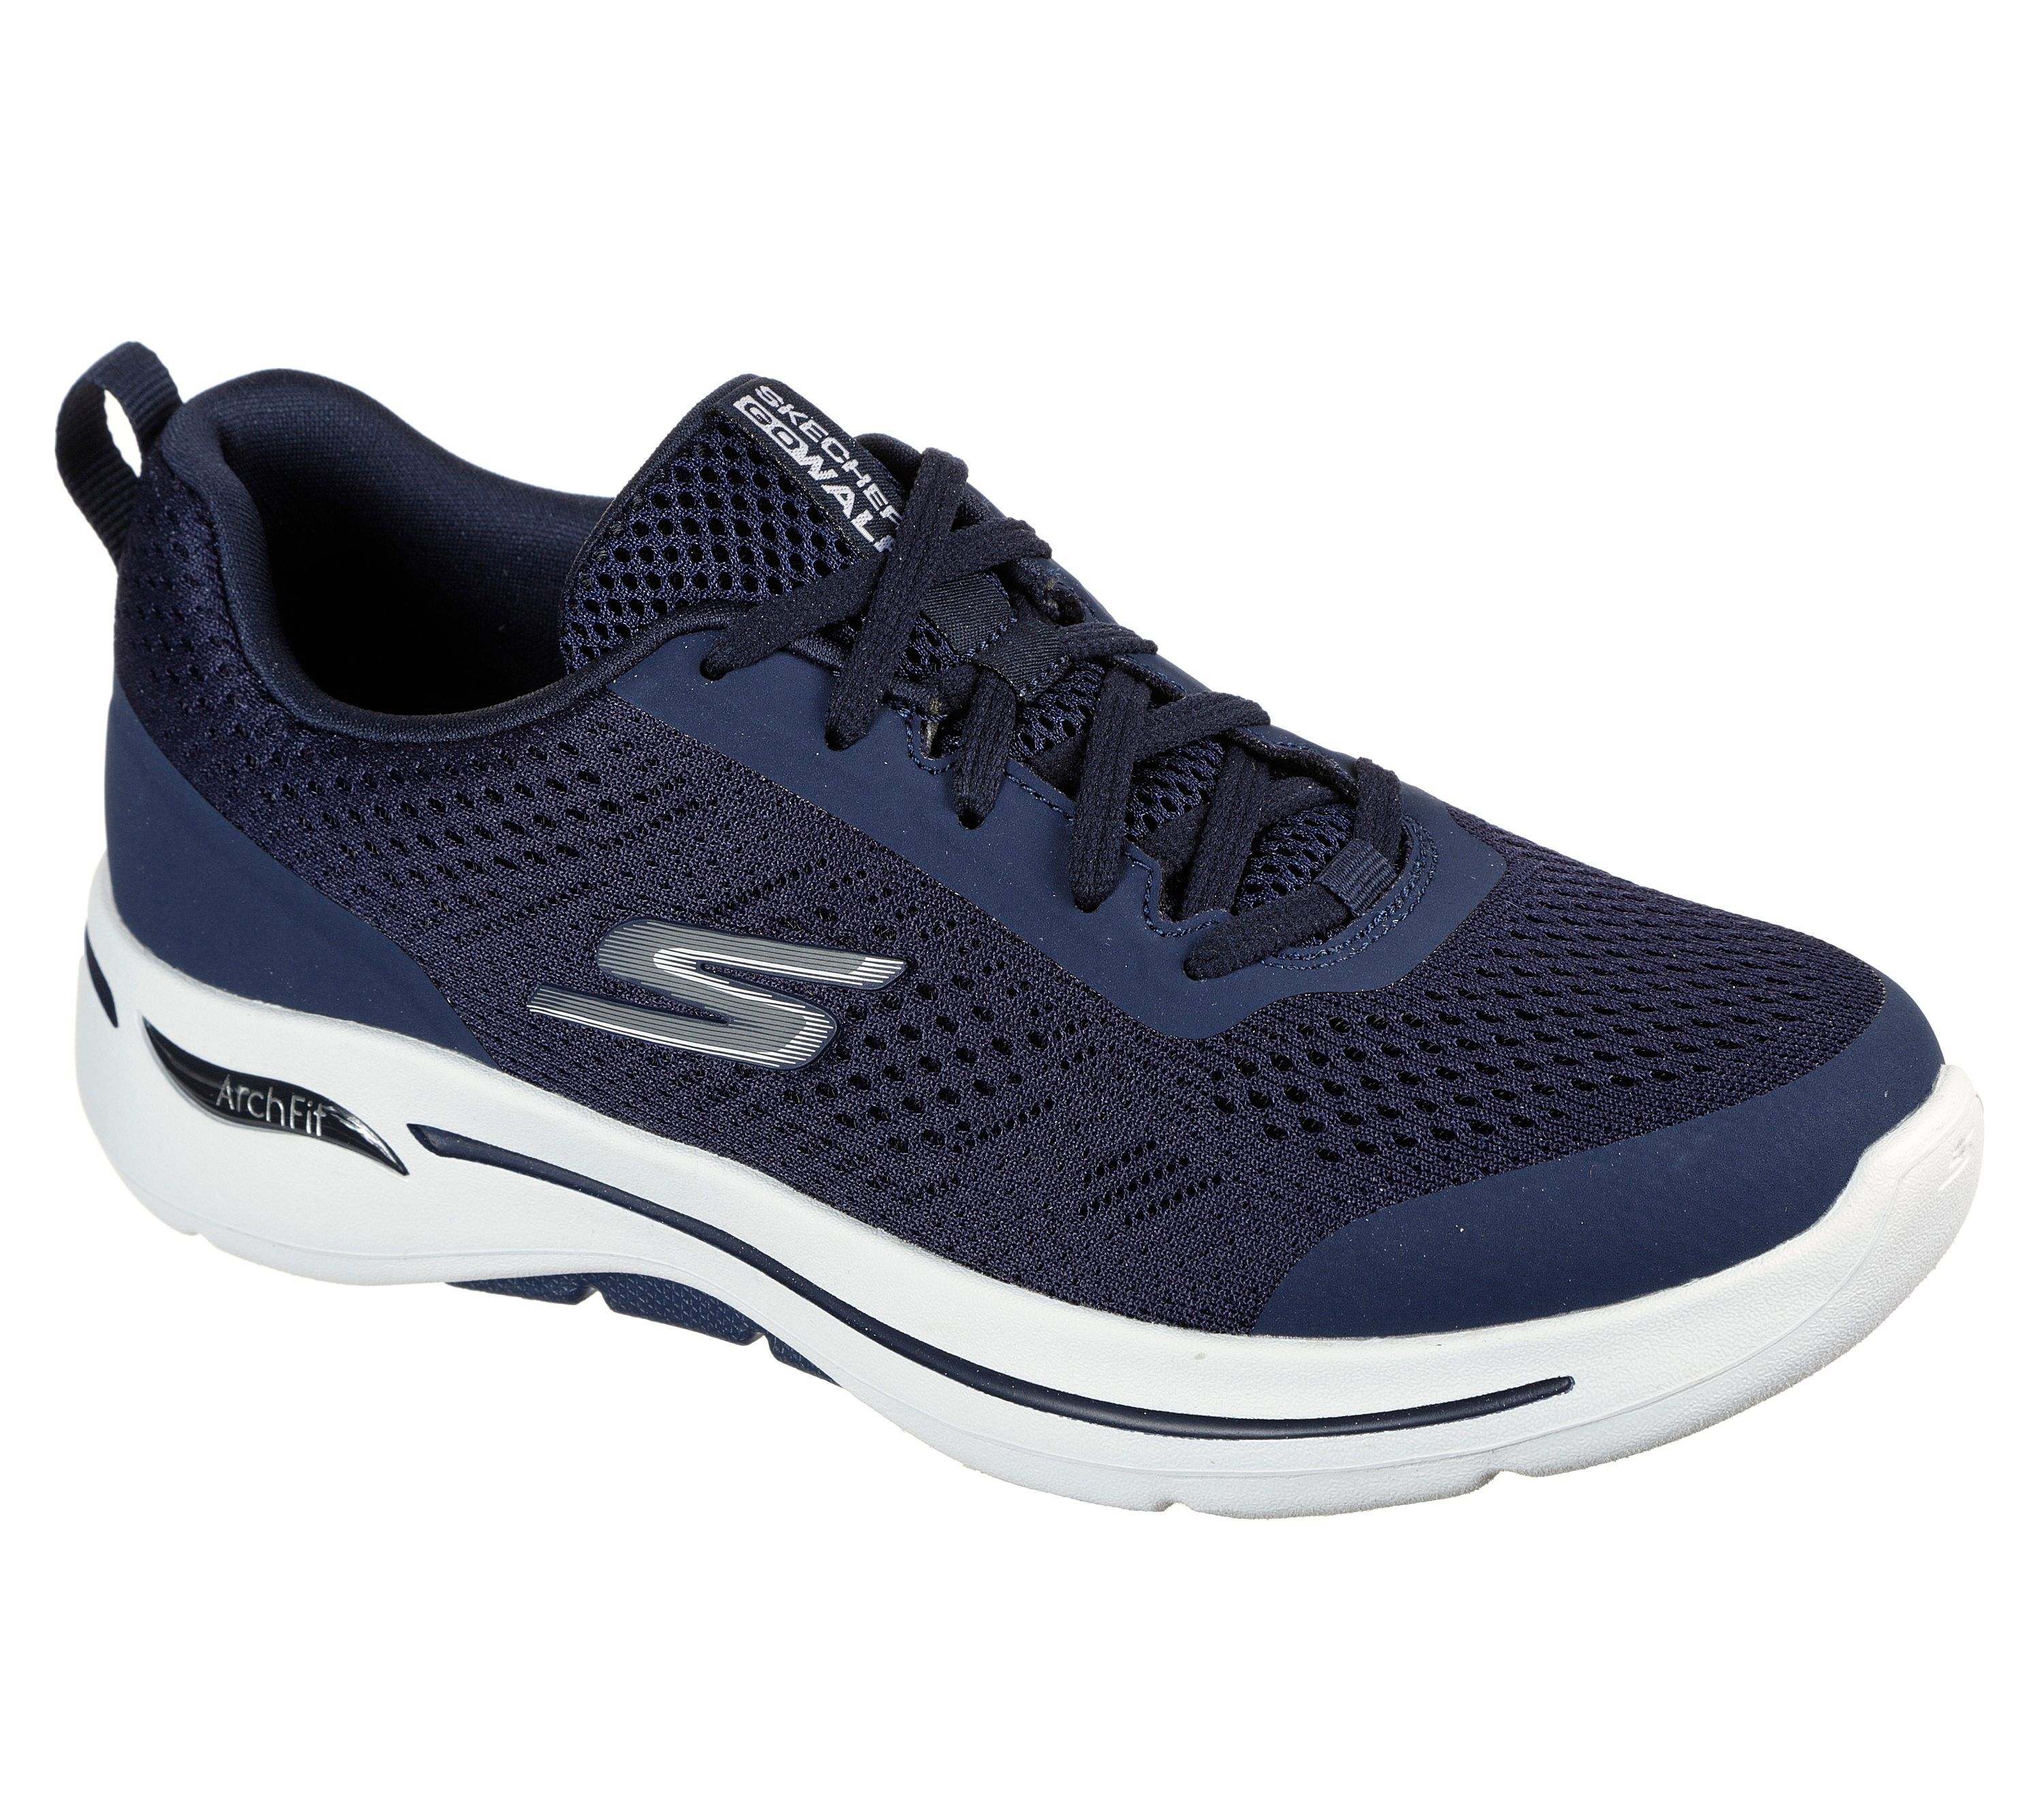 skechers shoes official website india